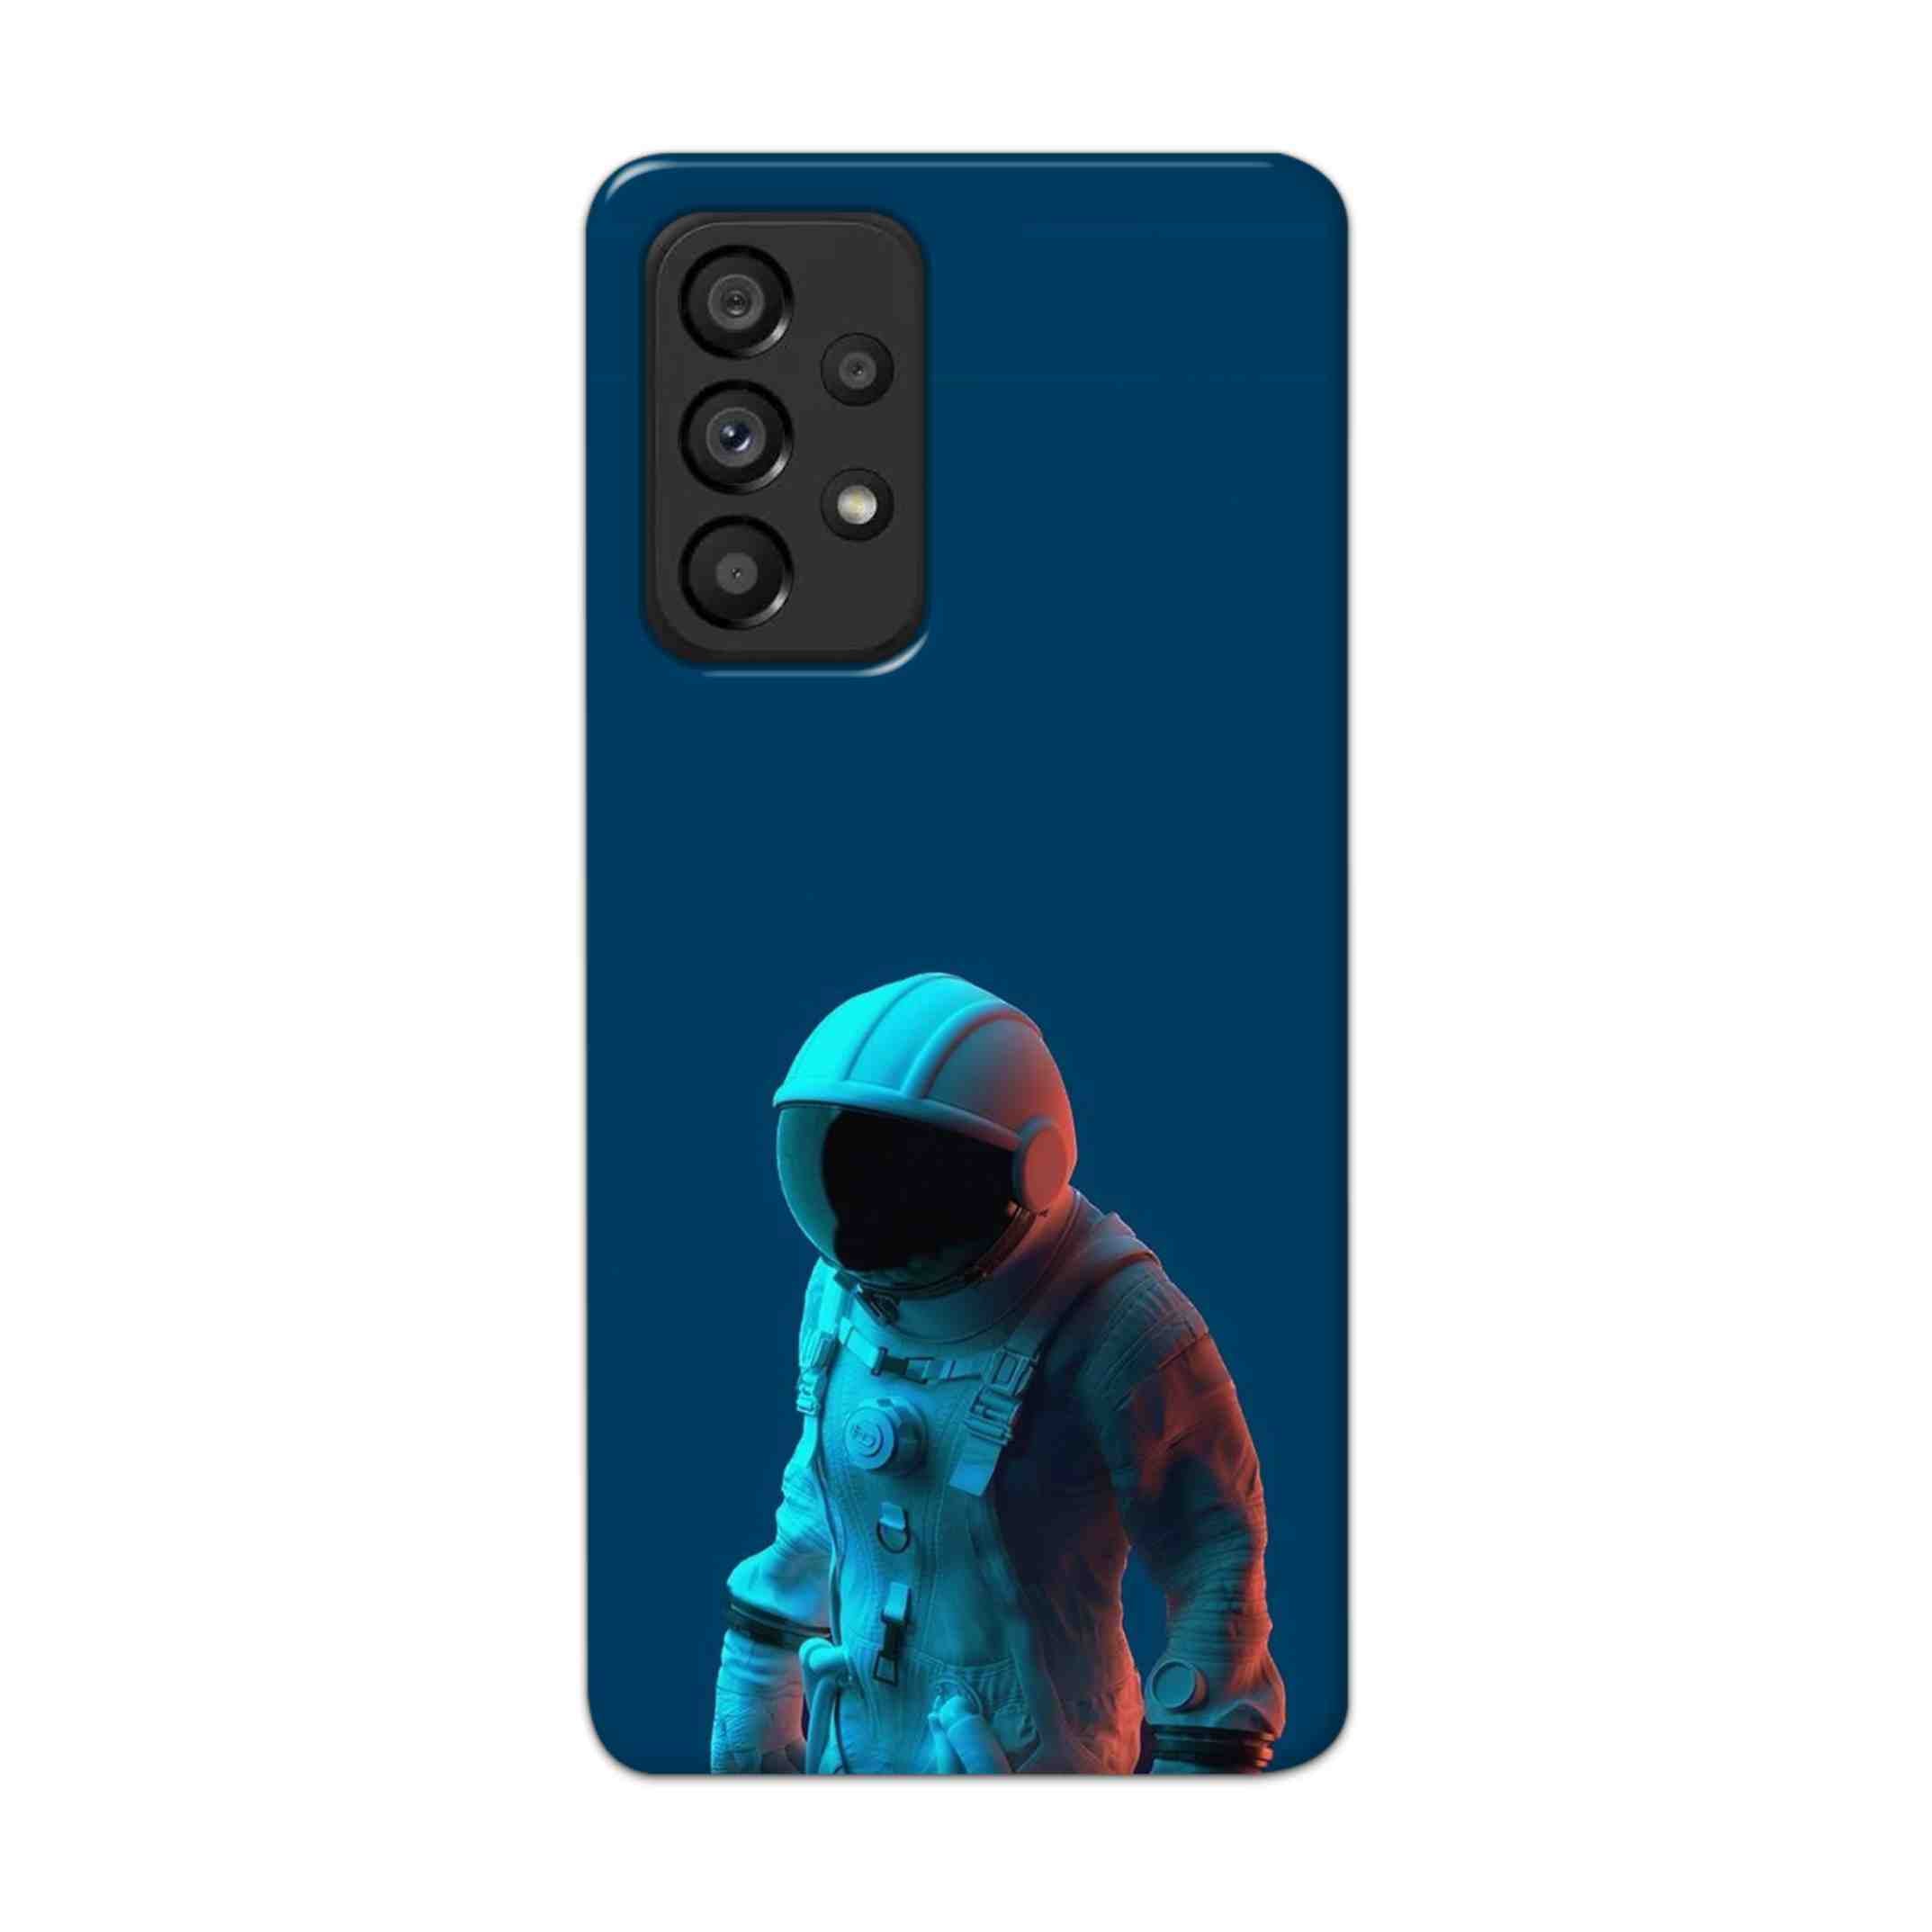 Buy Blue Astronaut Hard Back Mobile Phone Case Cover For Samsung Galaxy A53 5G Online